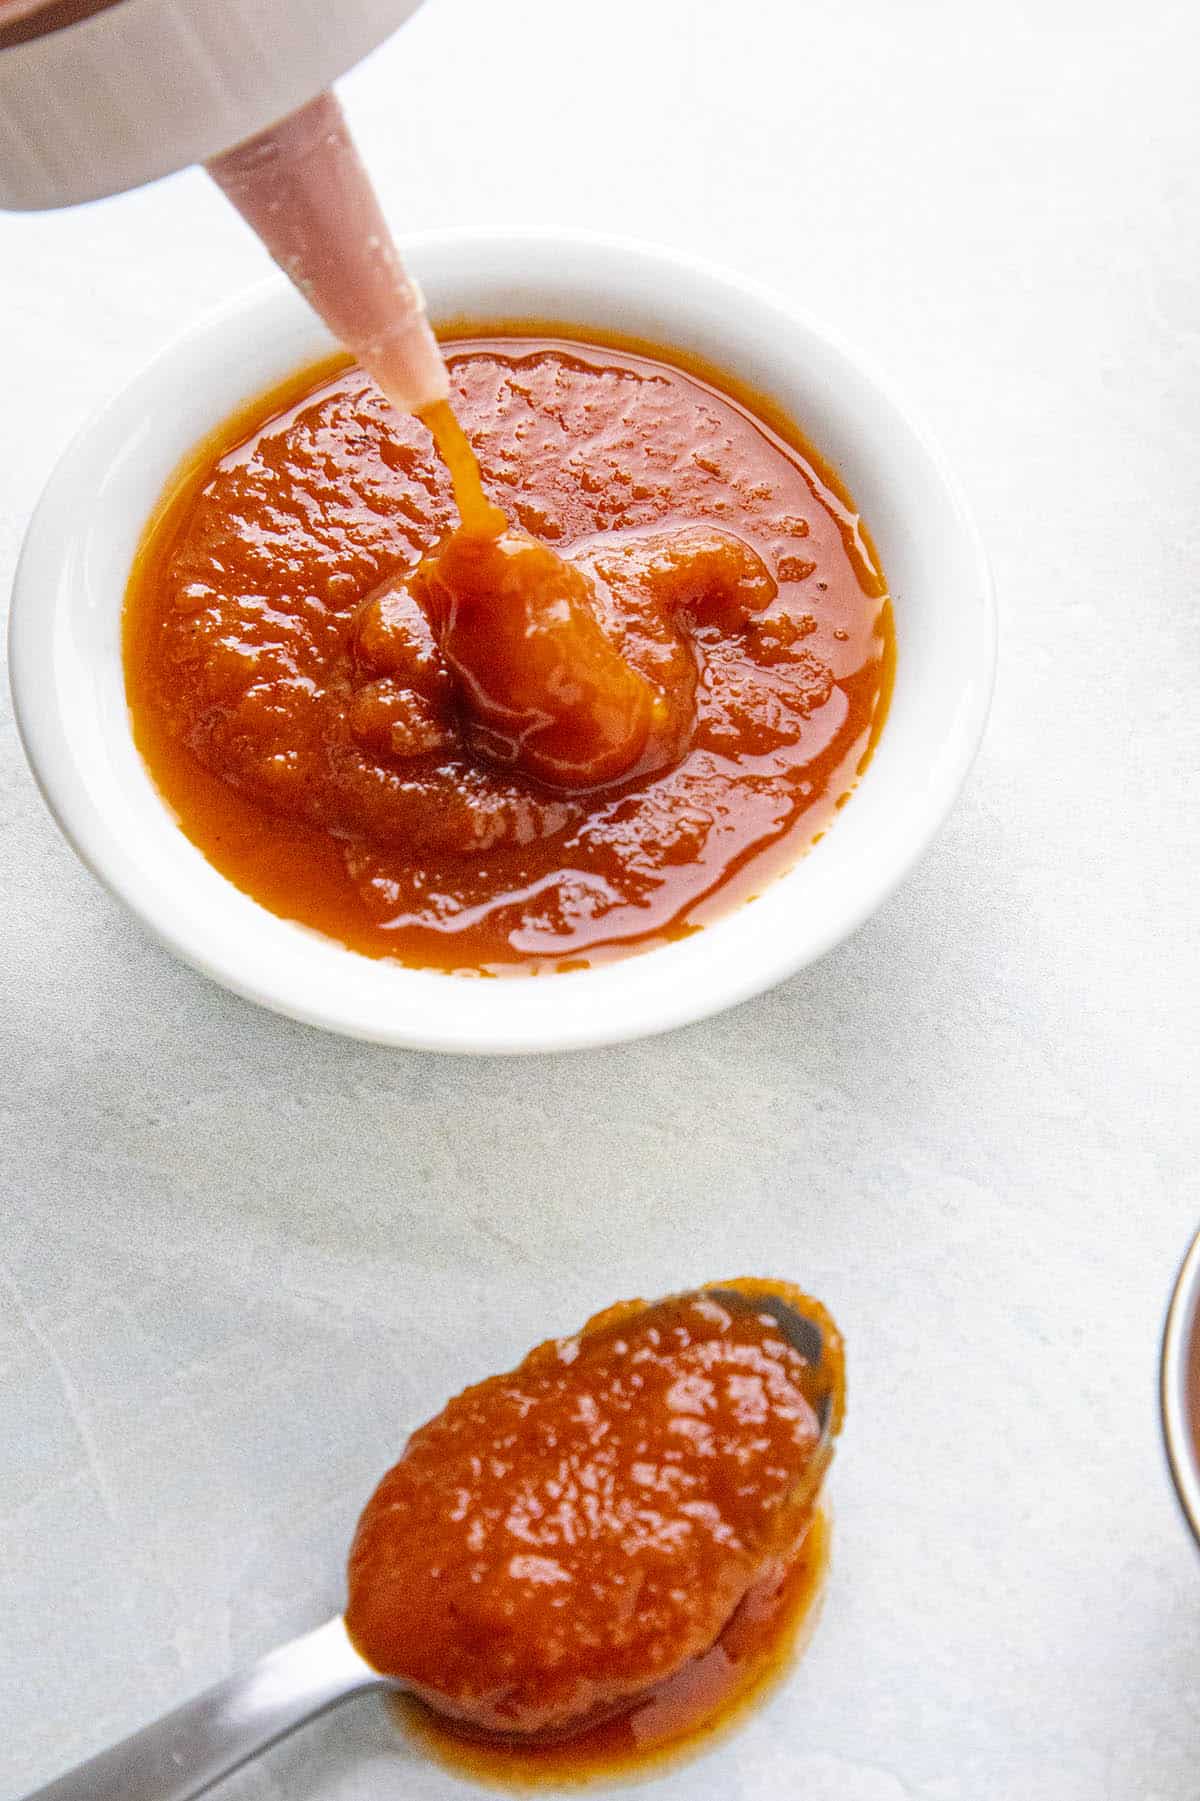 Squirting some homemade ketchup into a bowl